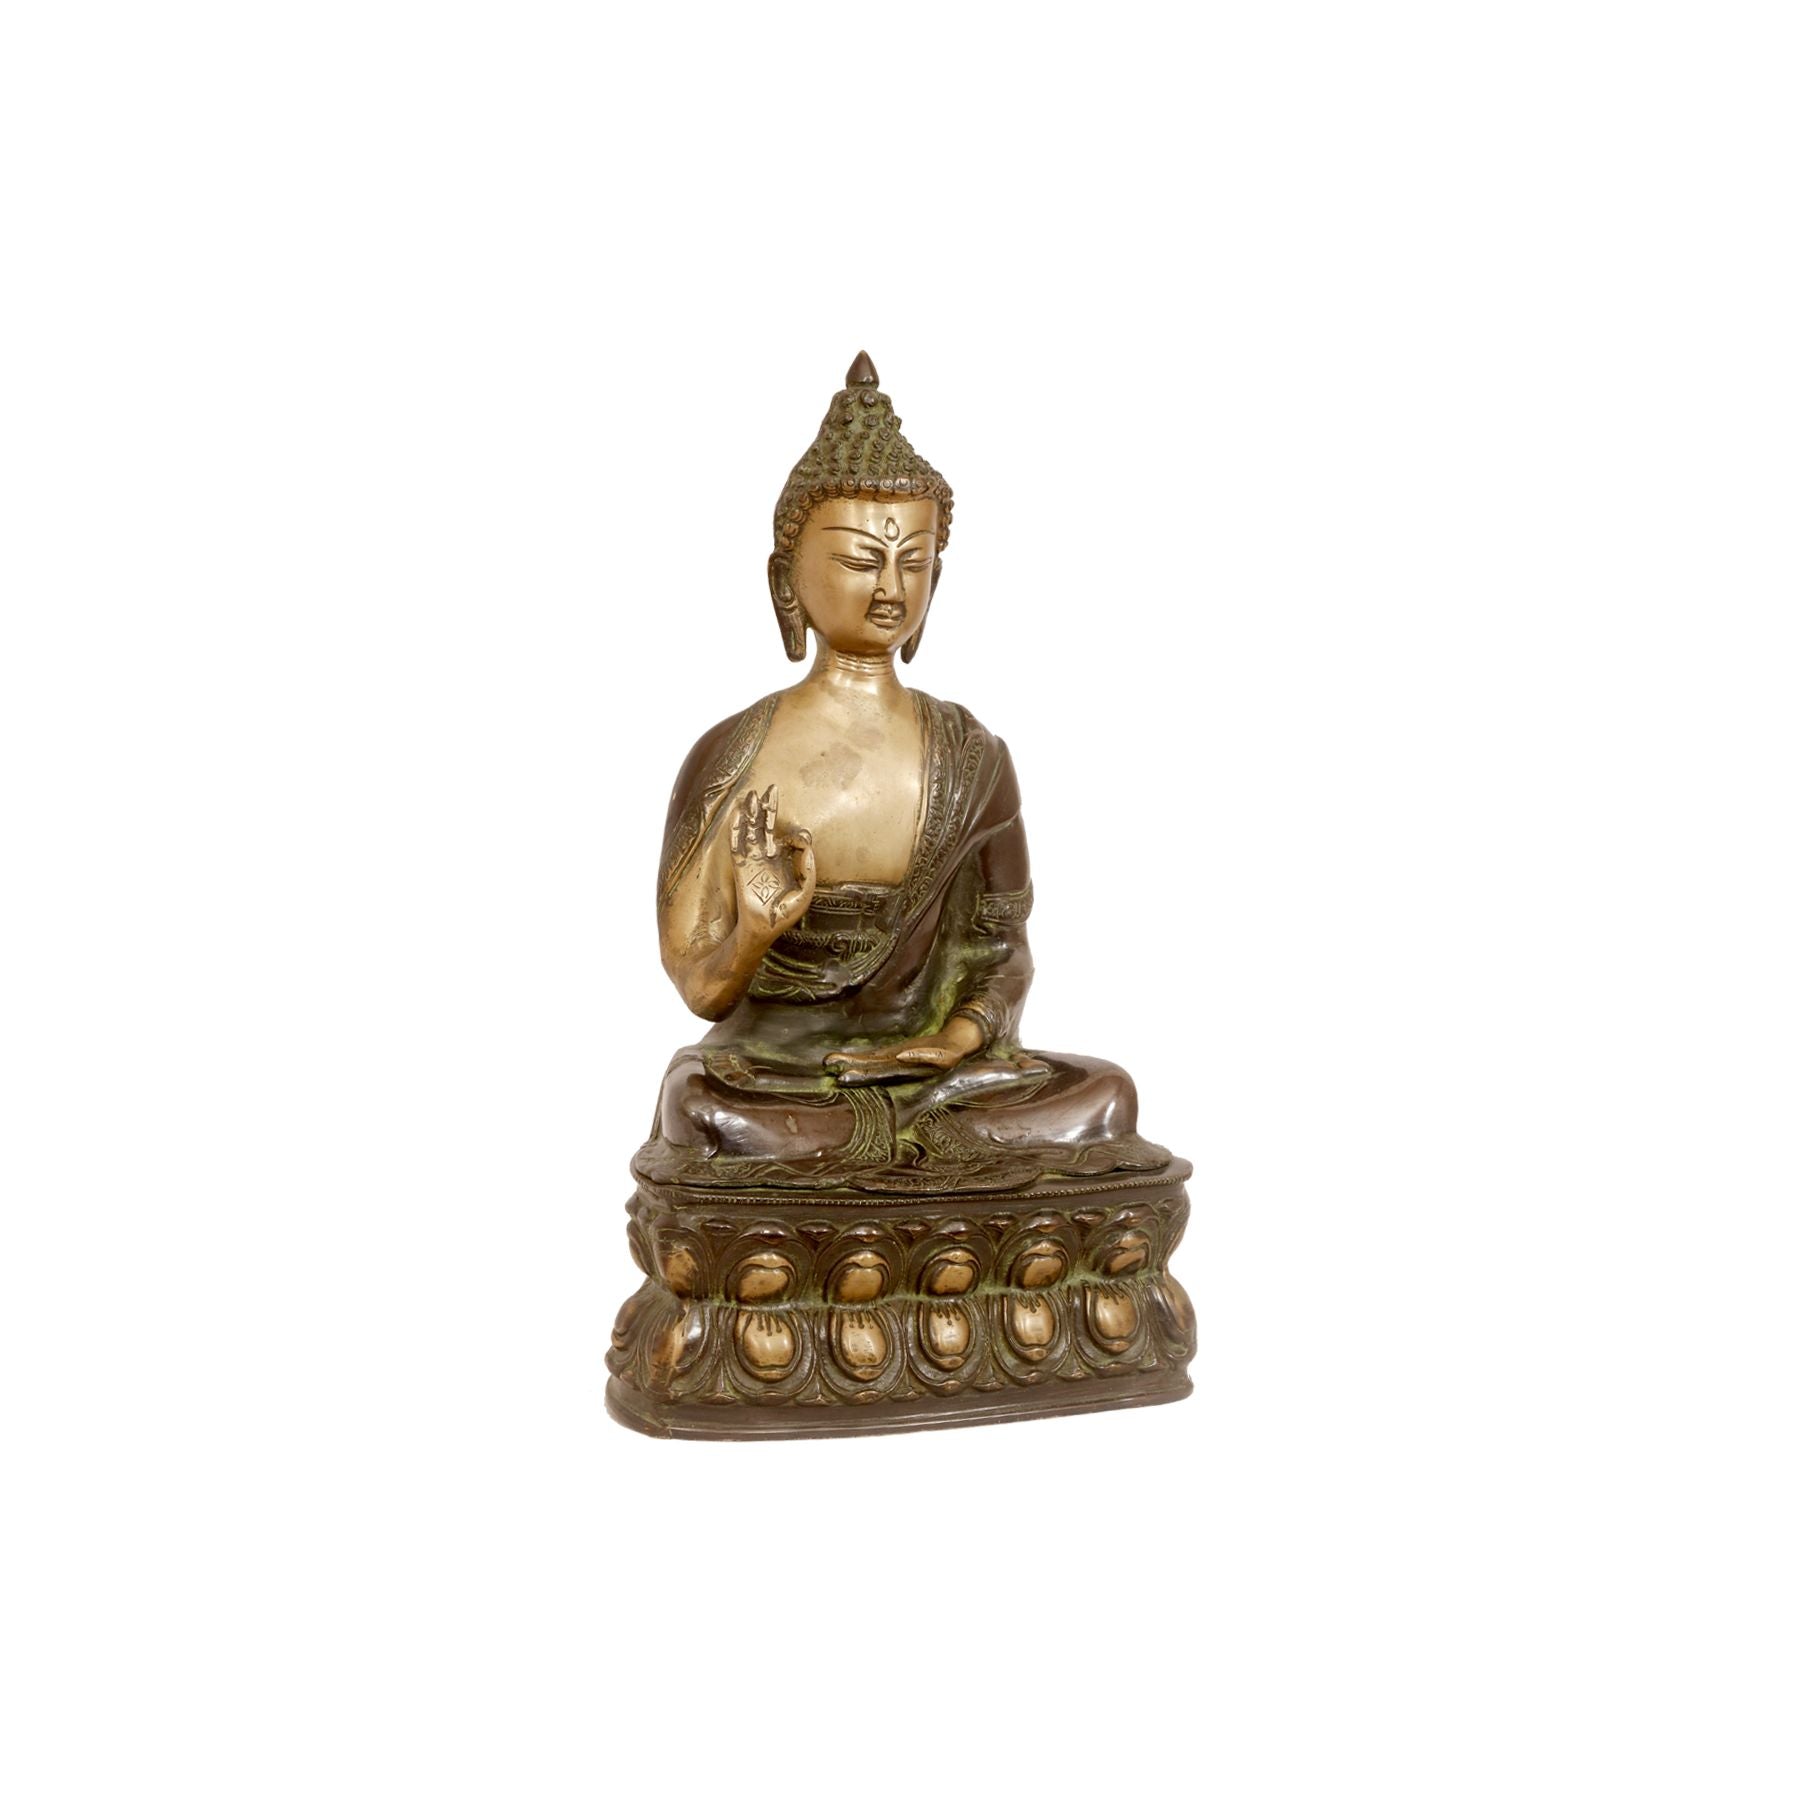 Antique Full Body Buddha Statue – 4kg Traditional Décor